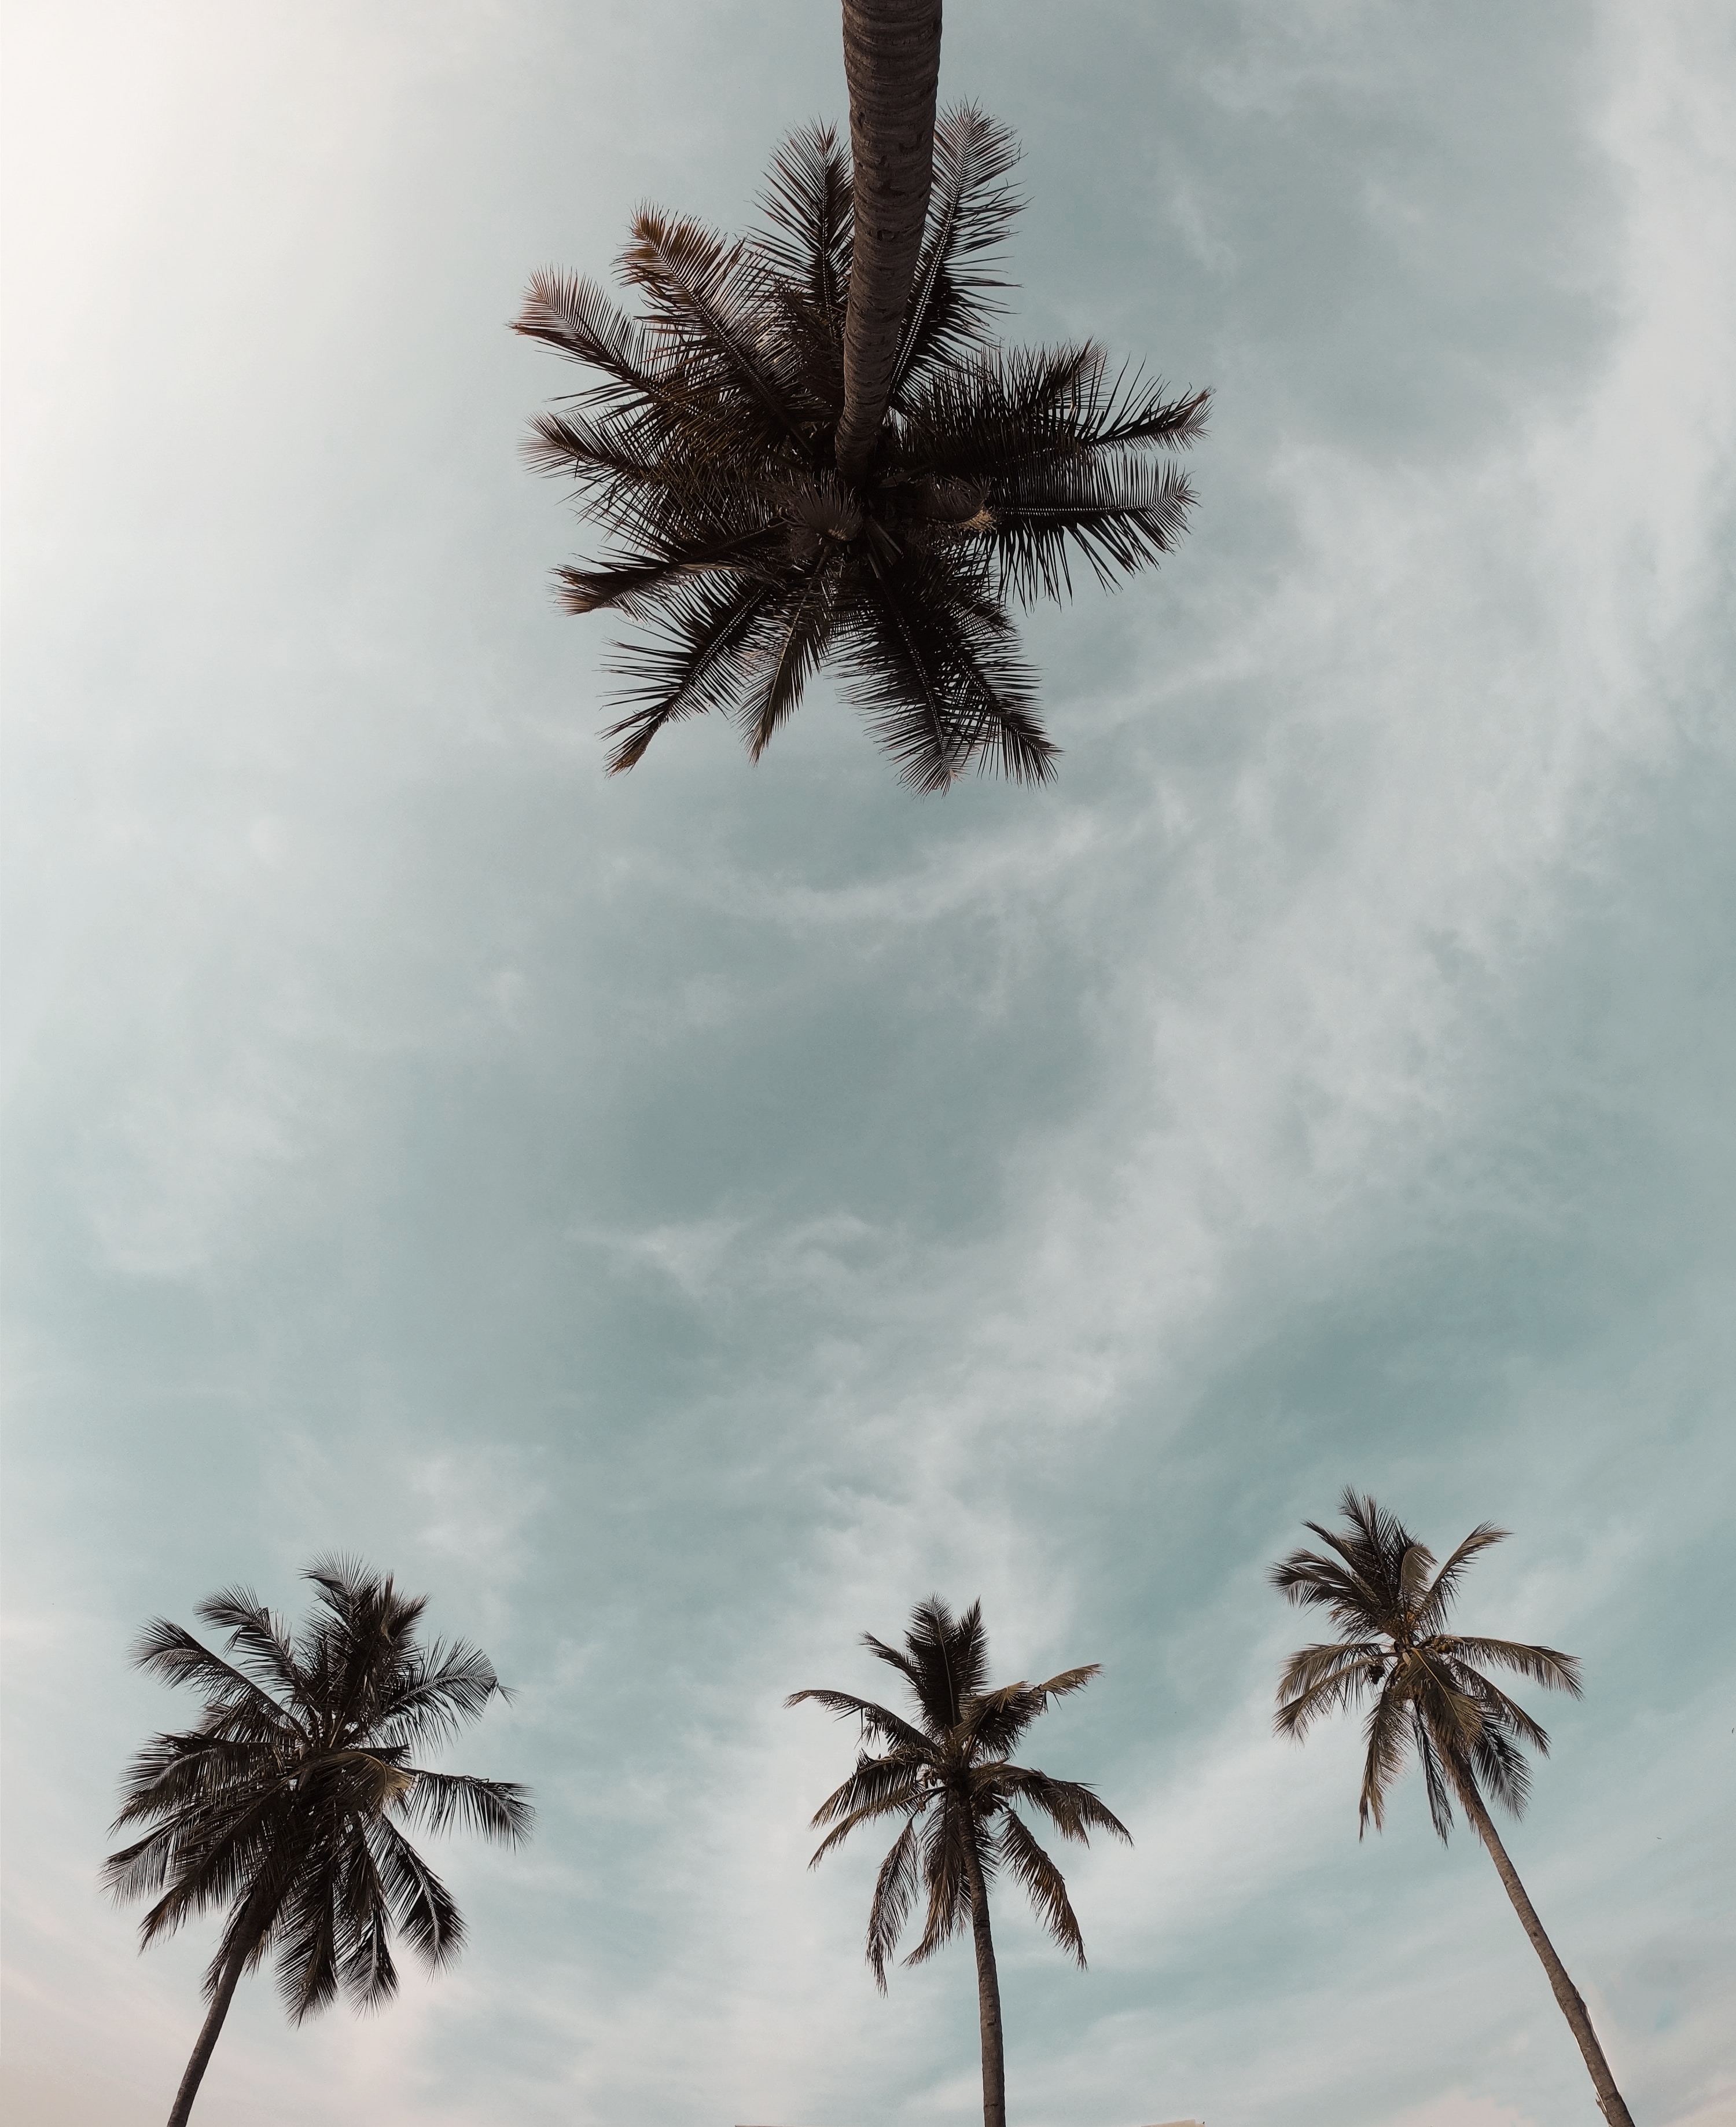 tops, palms, nature, trees, sky, top, crown, crowns